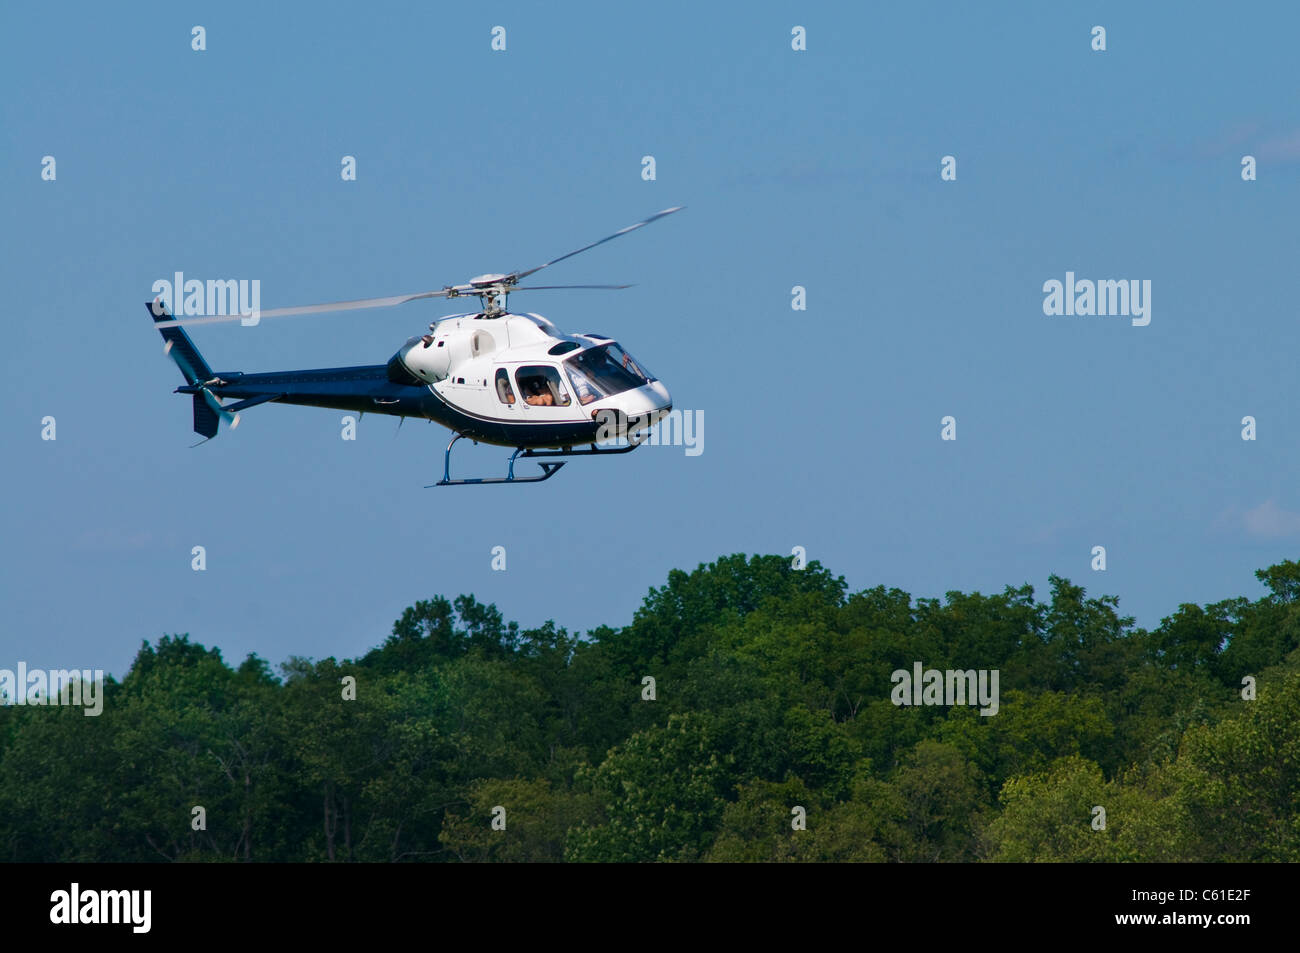 Helicopter landing or taking off over trees Stock Photo